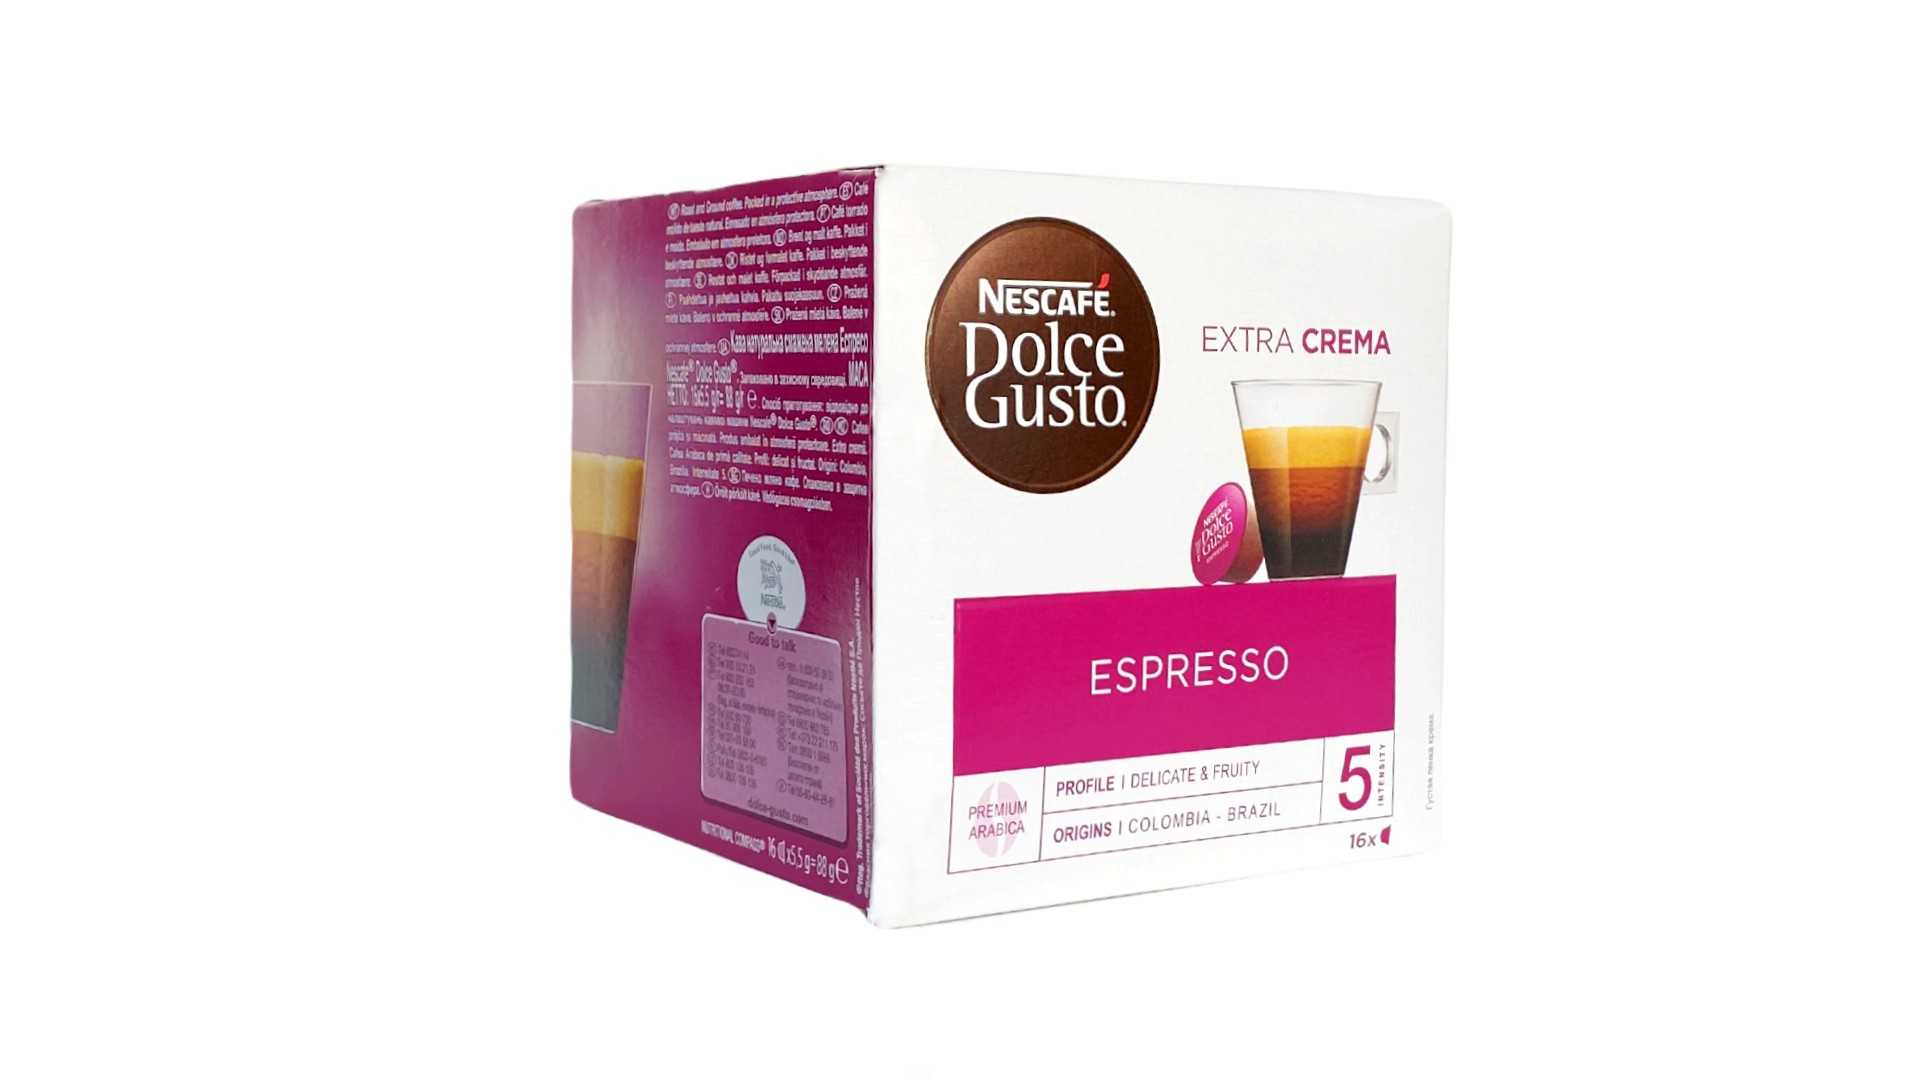 Espresso intenso капсулы Dolce gusto. "Cellini" капсулы для Dolce gusto Espresso deciso. Lebo Expresso dolche gusto. Дольче густо kr 230. Espresso dolce